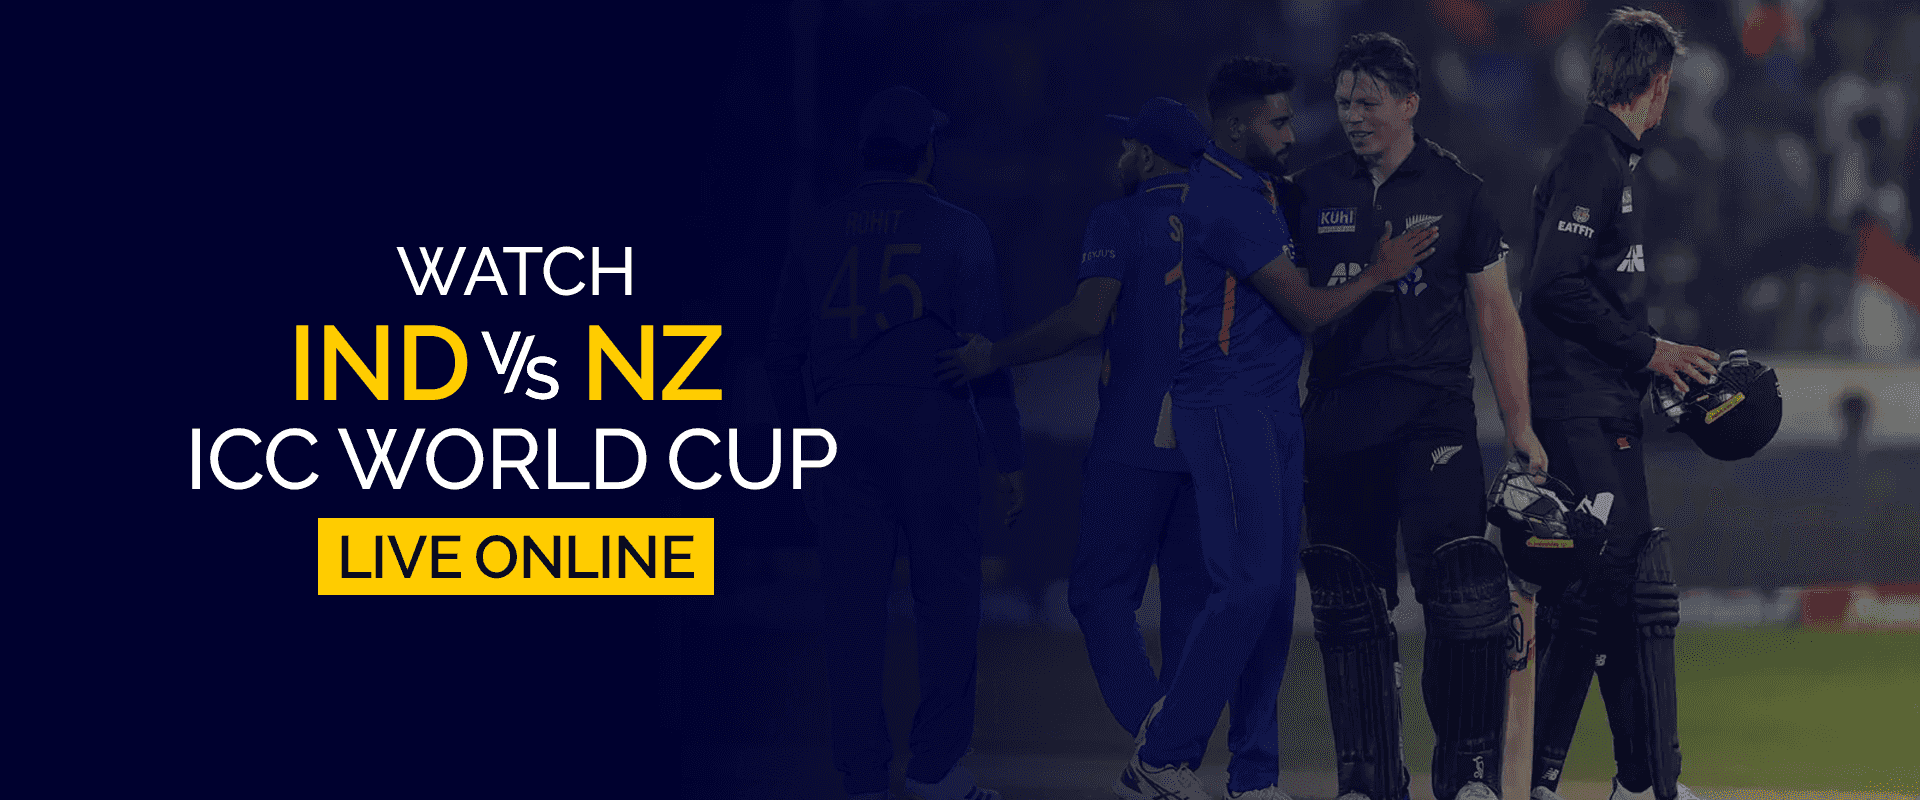 Watch India vs New Zealand ICC World Cup Live Online